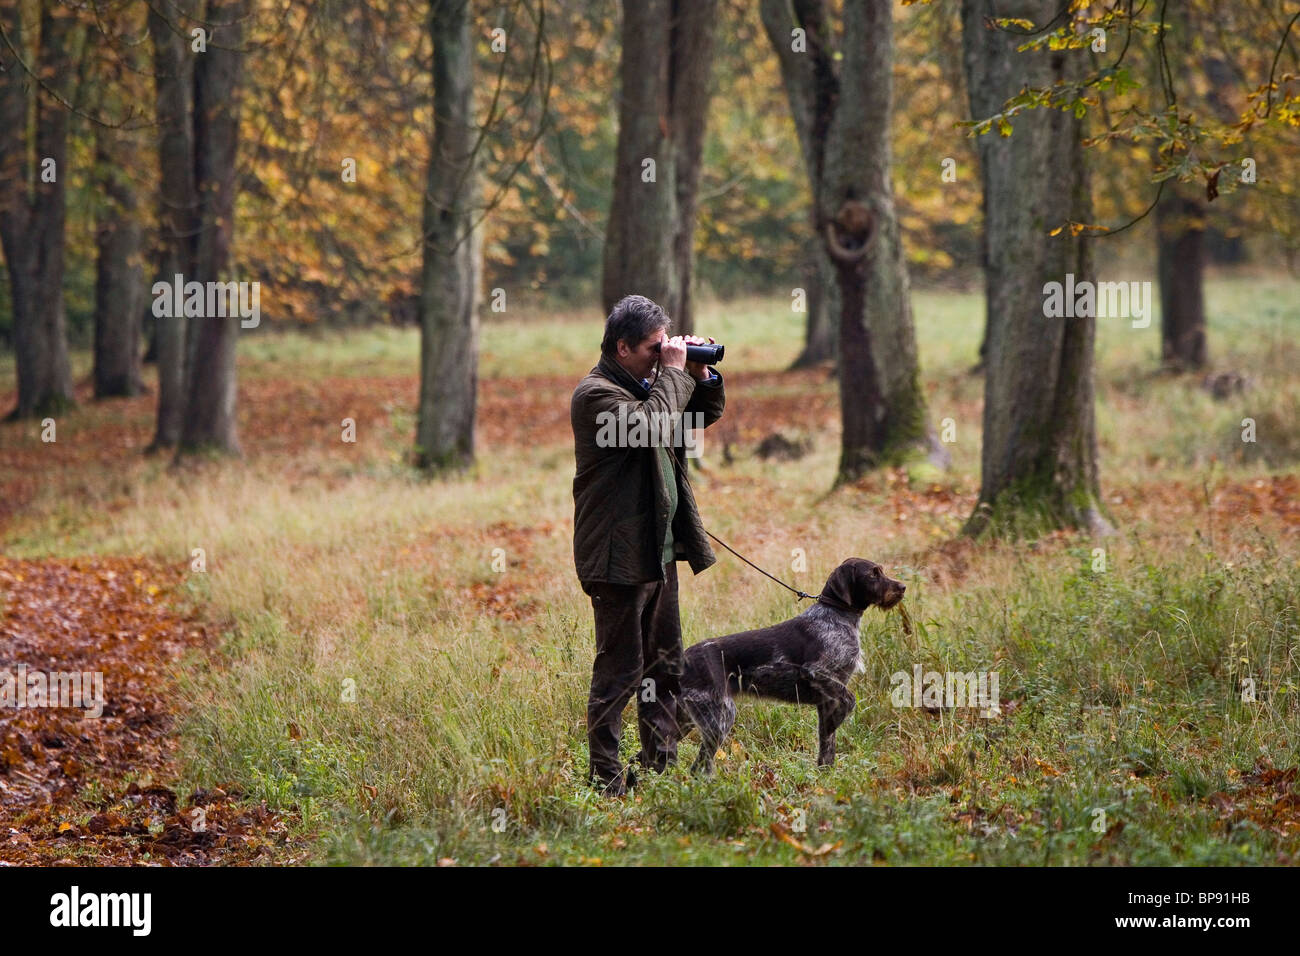 chief forester Menzel, ranger with dog in the Sau Park Springe, Hanover region, Lower Saxony, northern Germany Stock Photo